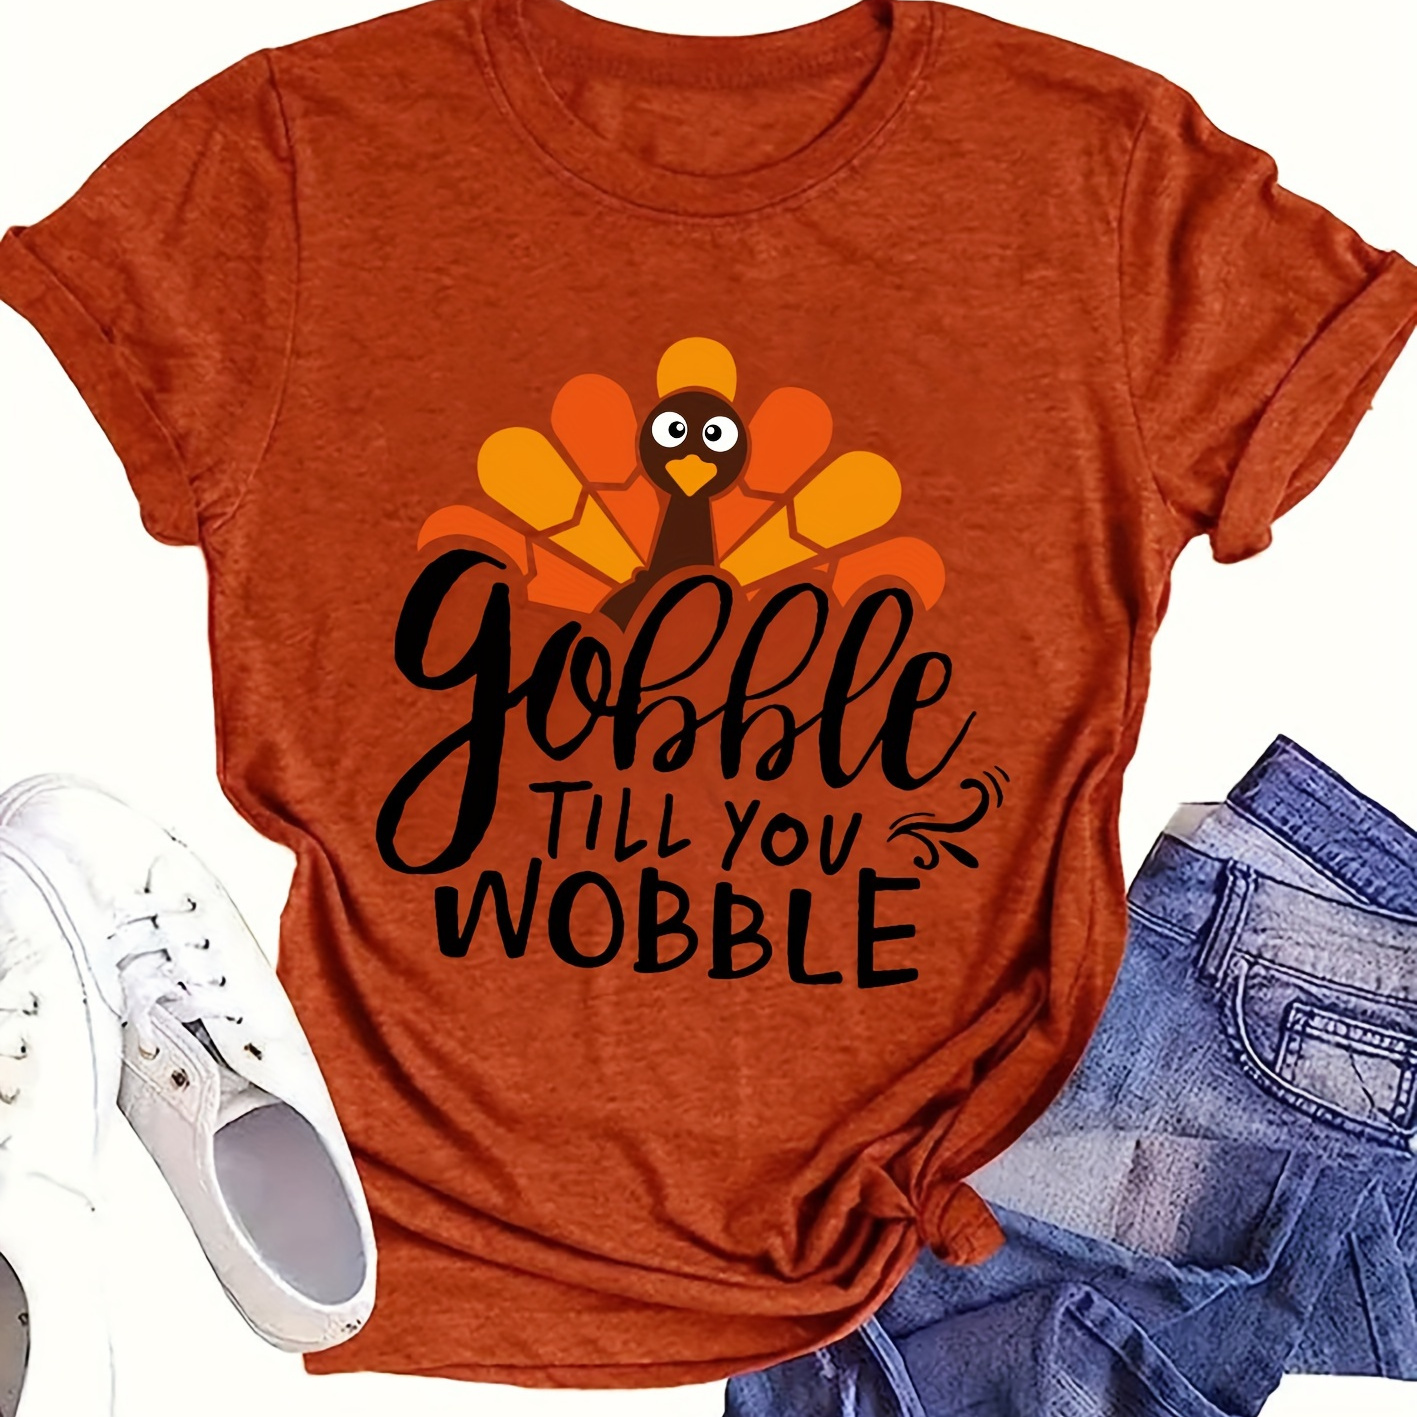 

Thanksgiving Animal & Letter Print T-shirt, Casual Short Sleeve Top For Spring & Summer, Women's Clothing